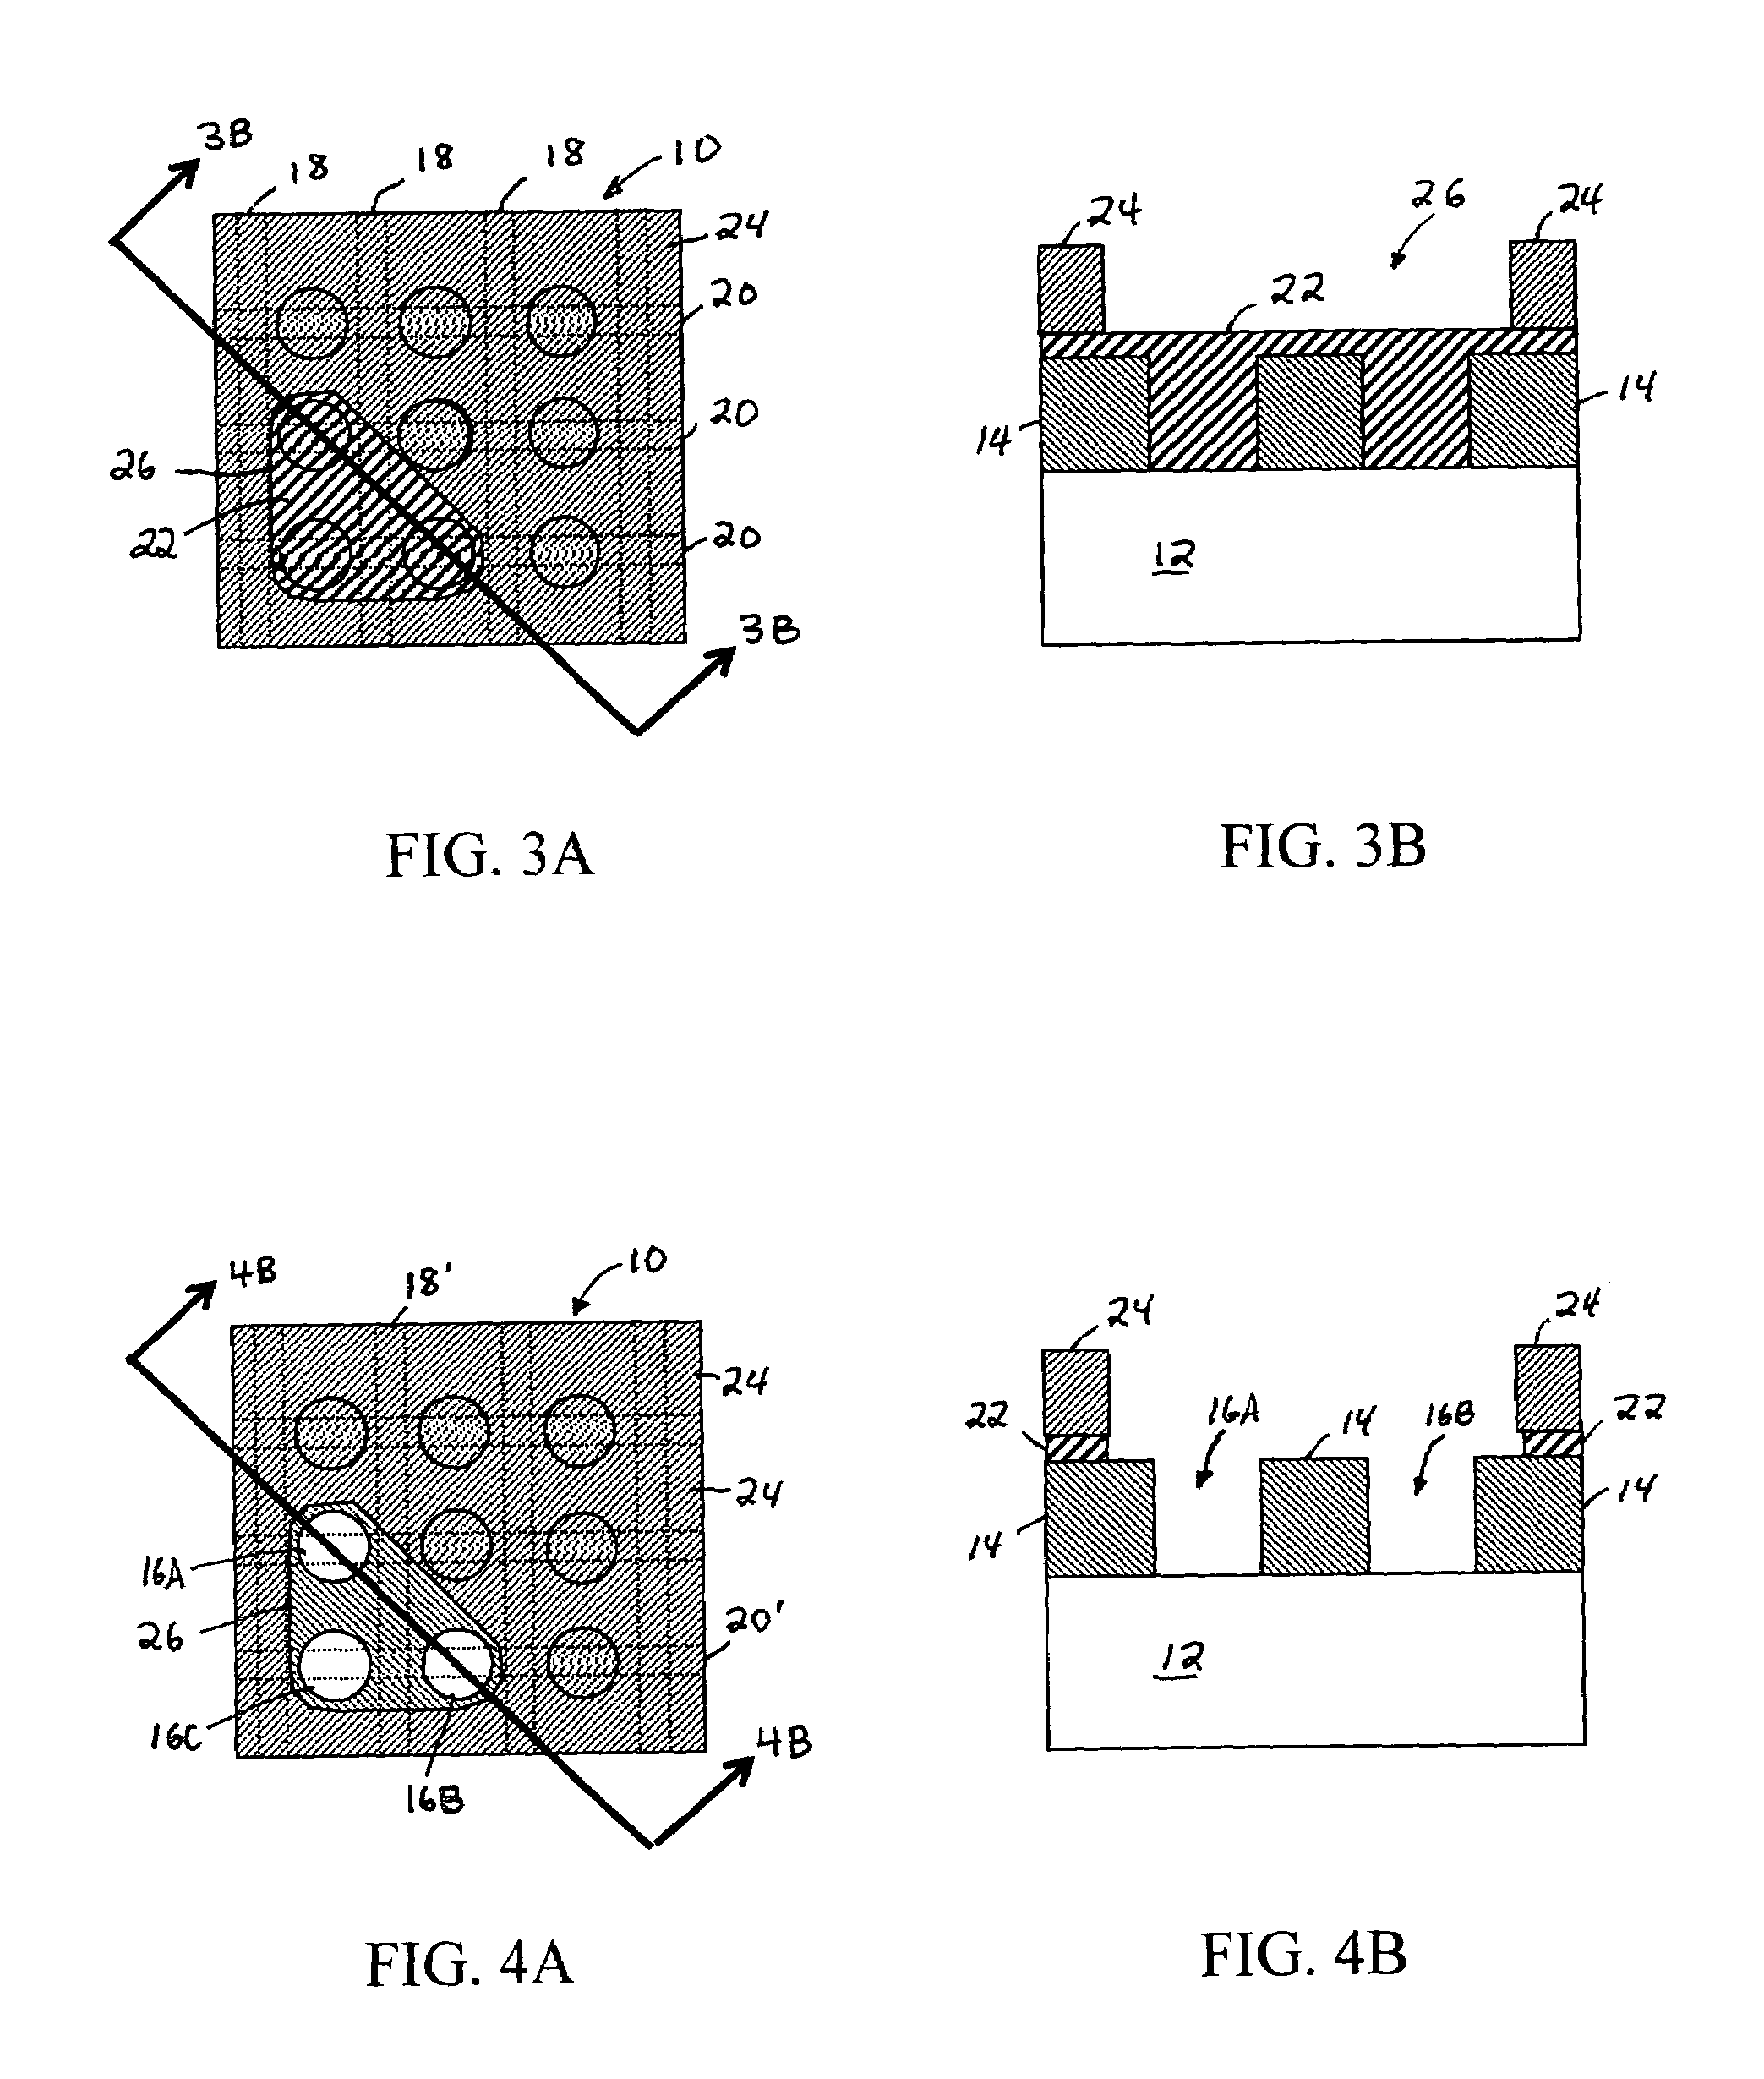 Methods of code programming a mask ROM device